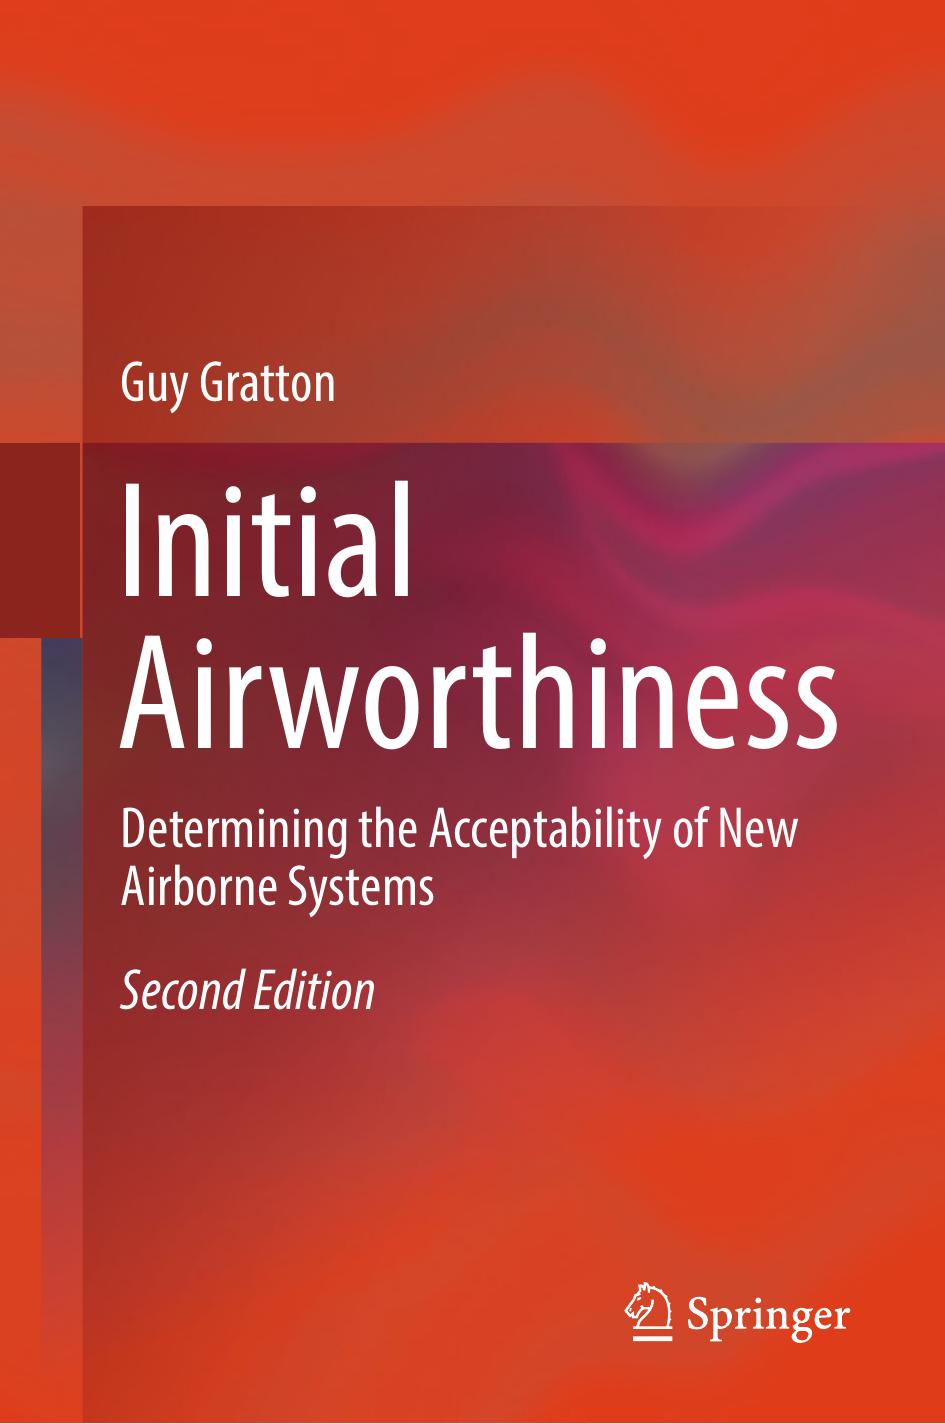 Initial Airworthiness by Guy Gratton